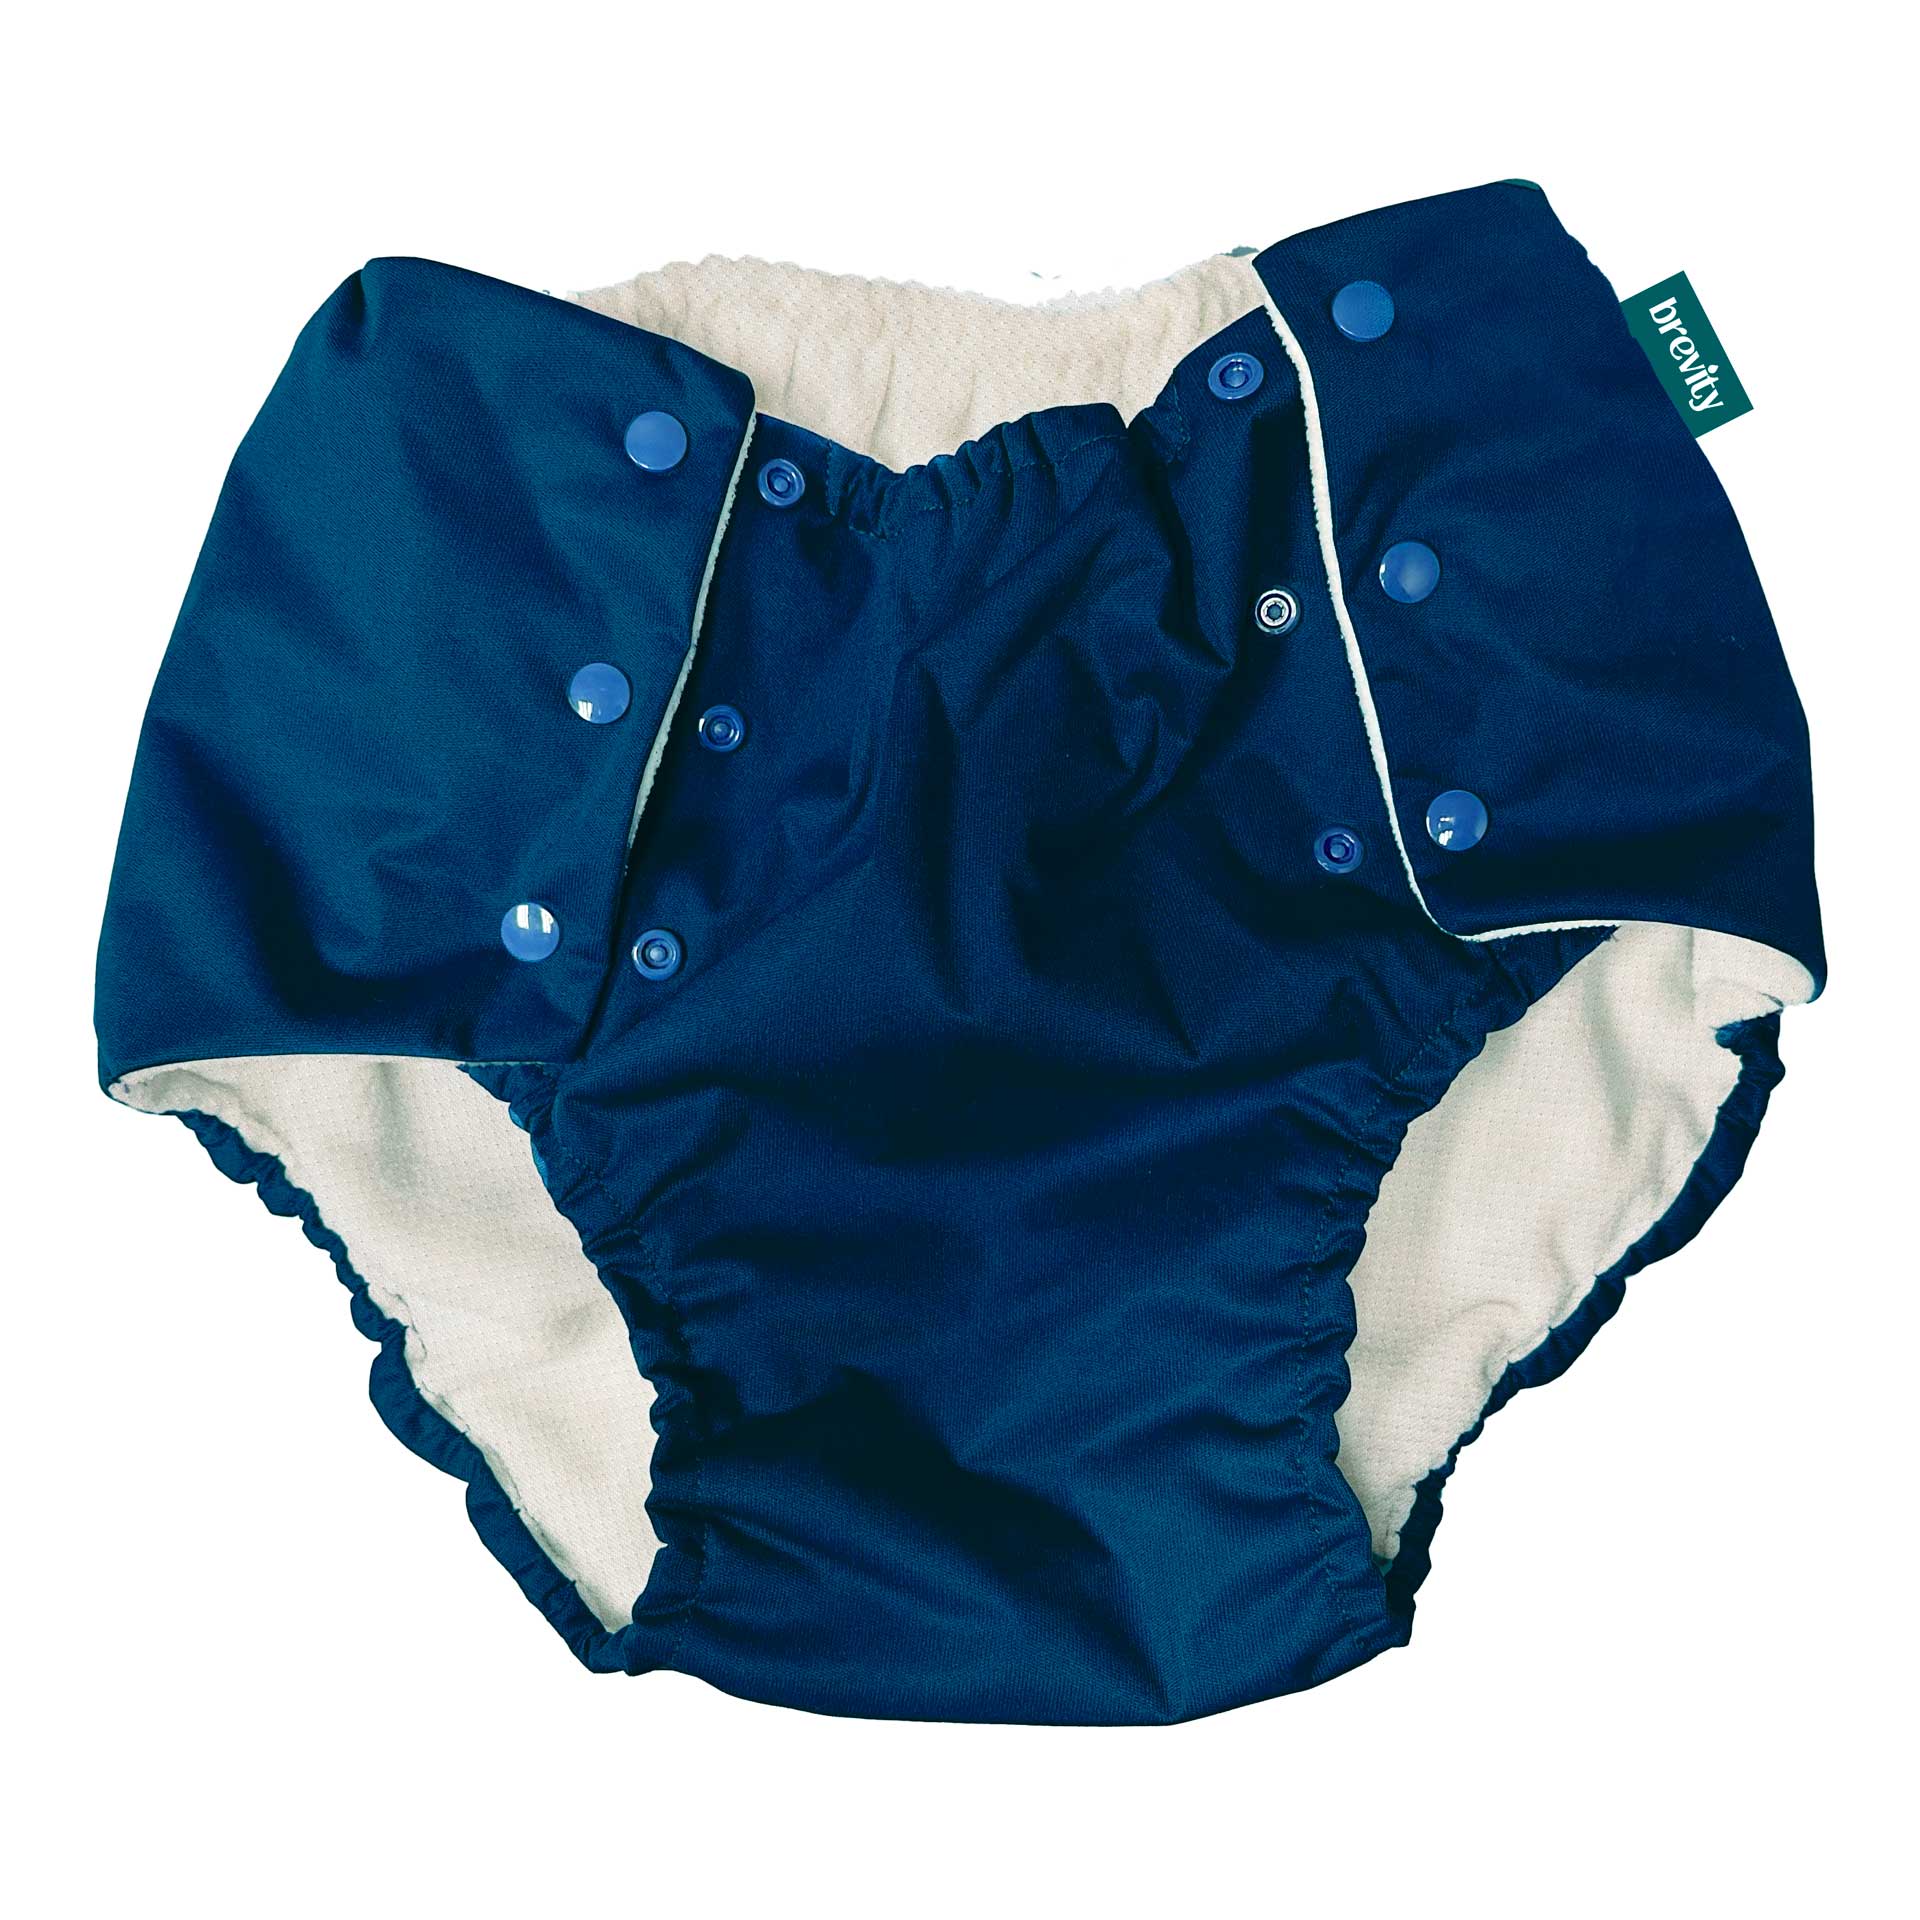 Haian Snap-up Adult Diaper Covers